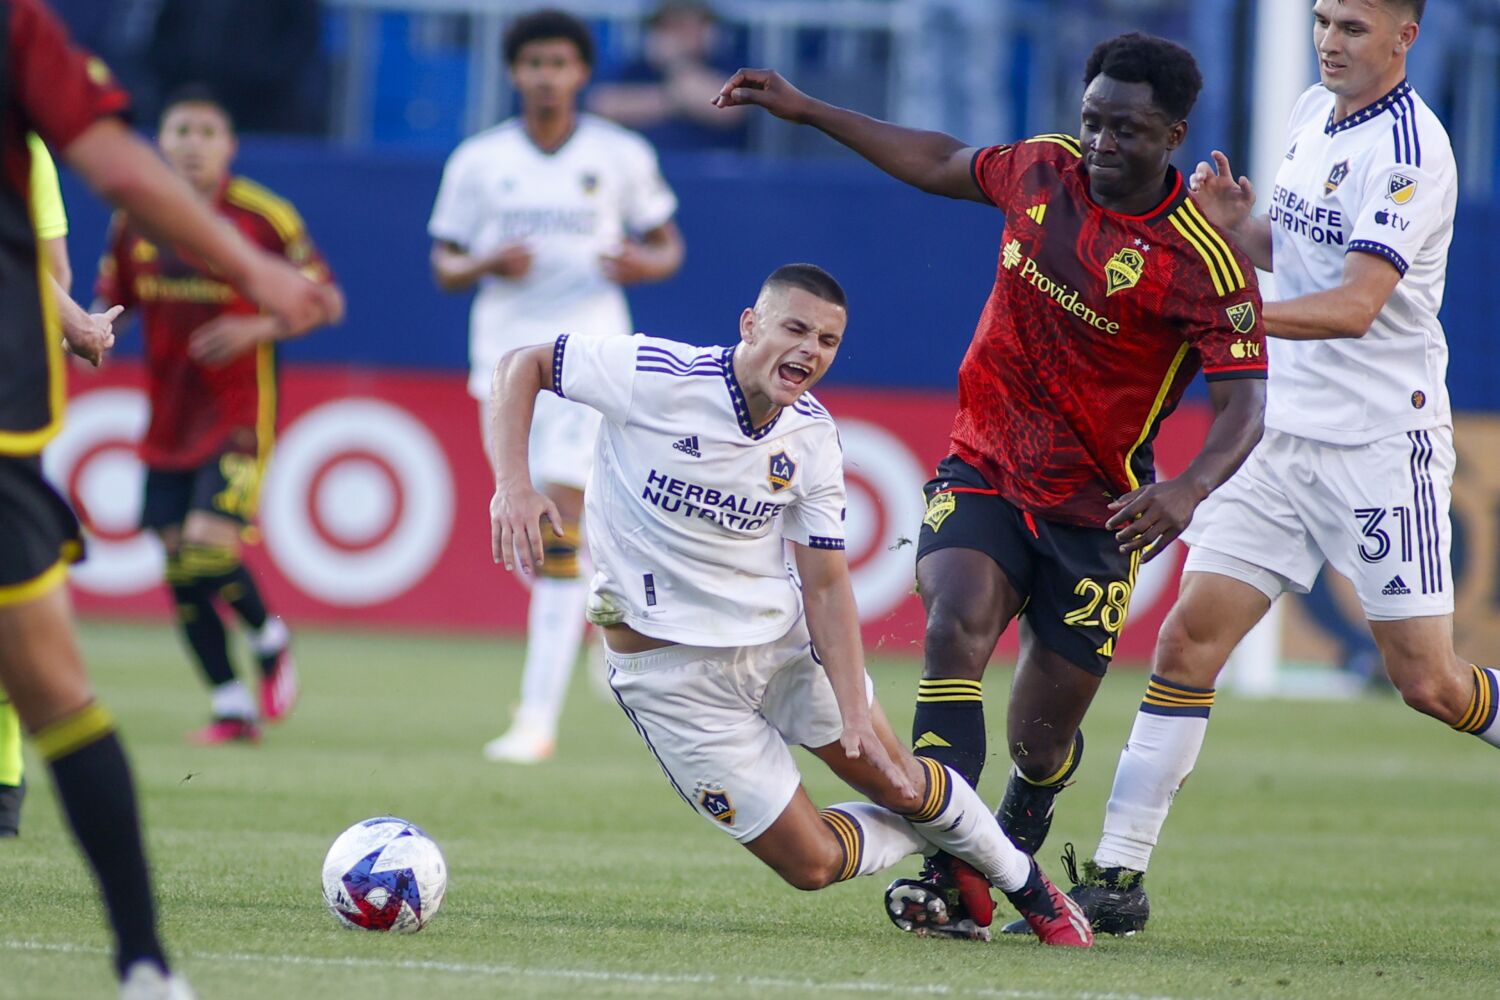 Galaxy fall behind in first half and can't catch up in loss to Sounders 